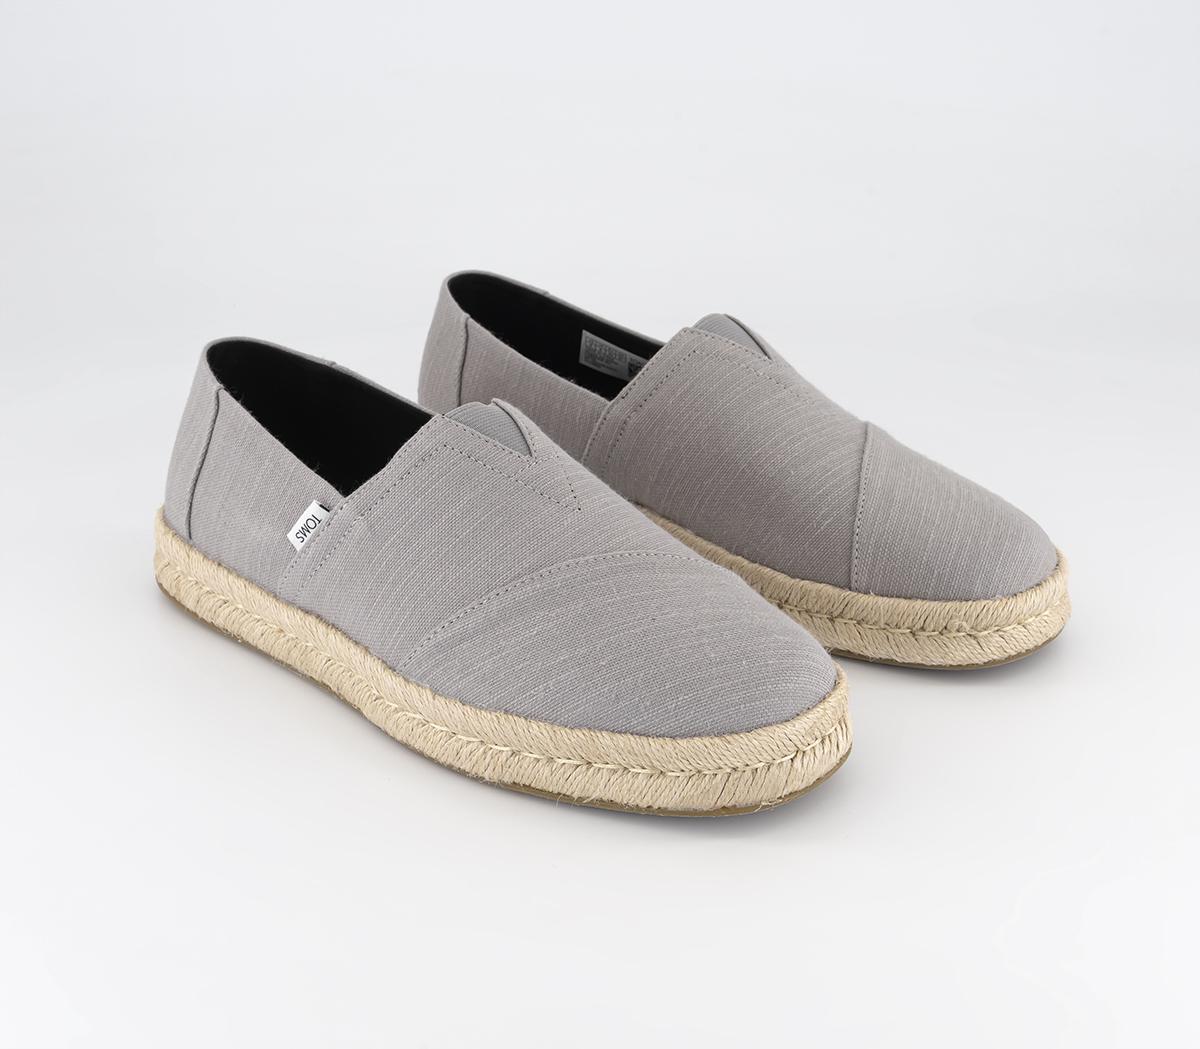 TOMS Mens Alpargata Rope 2.0 Slip Ons Drizzle Grey Recycled Cotton Slubby Woven, 10